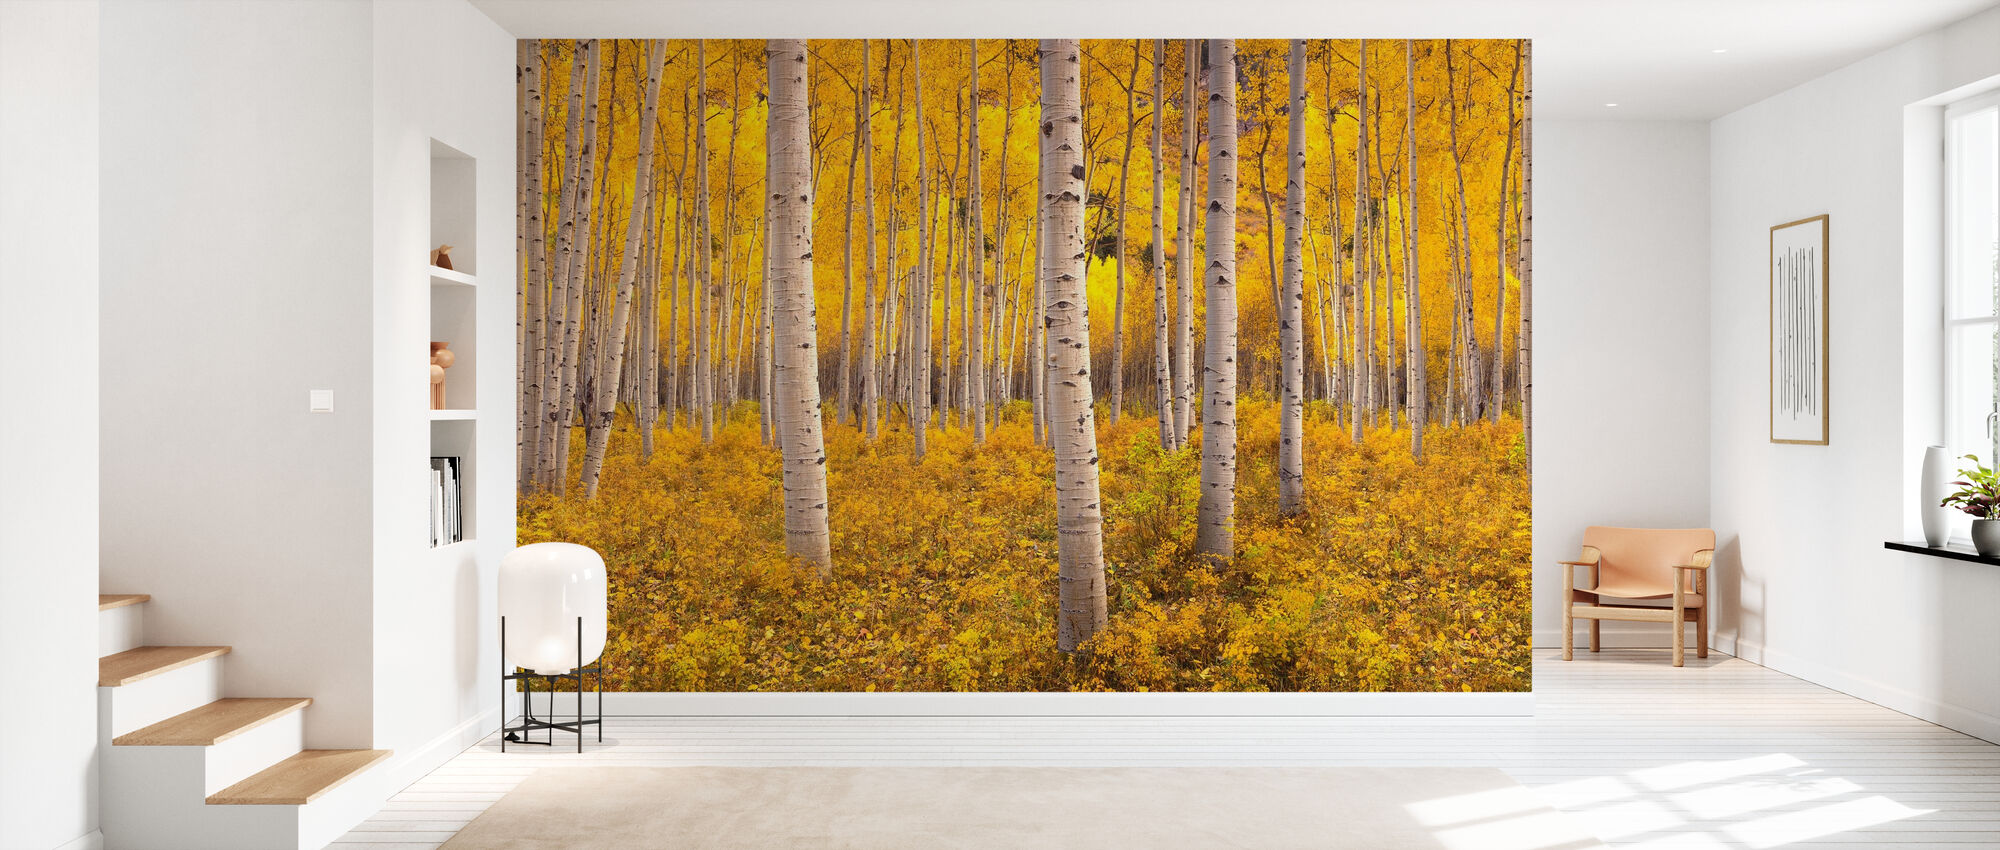 Aspen tree forest â affordable wall mural â